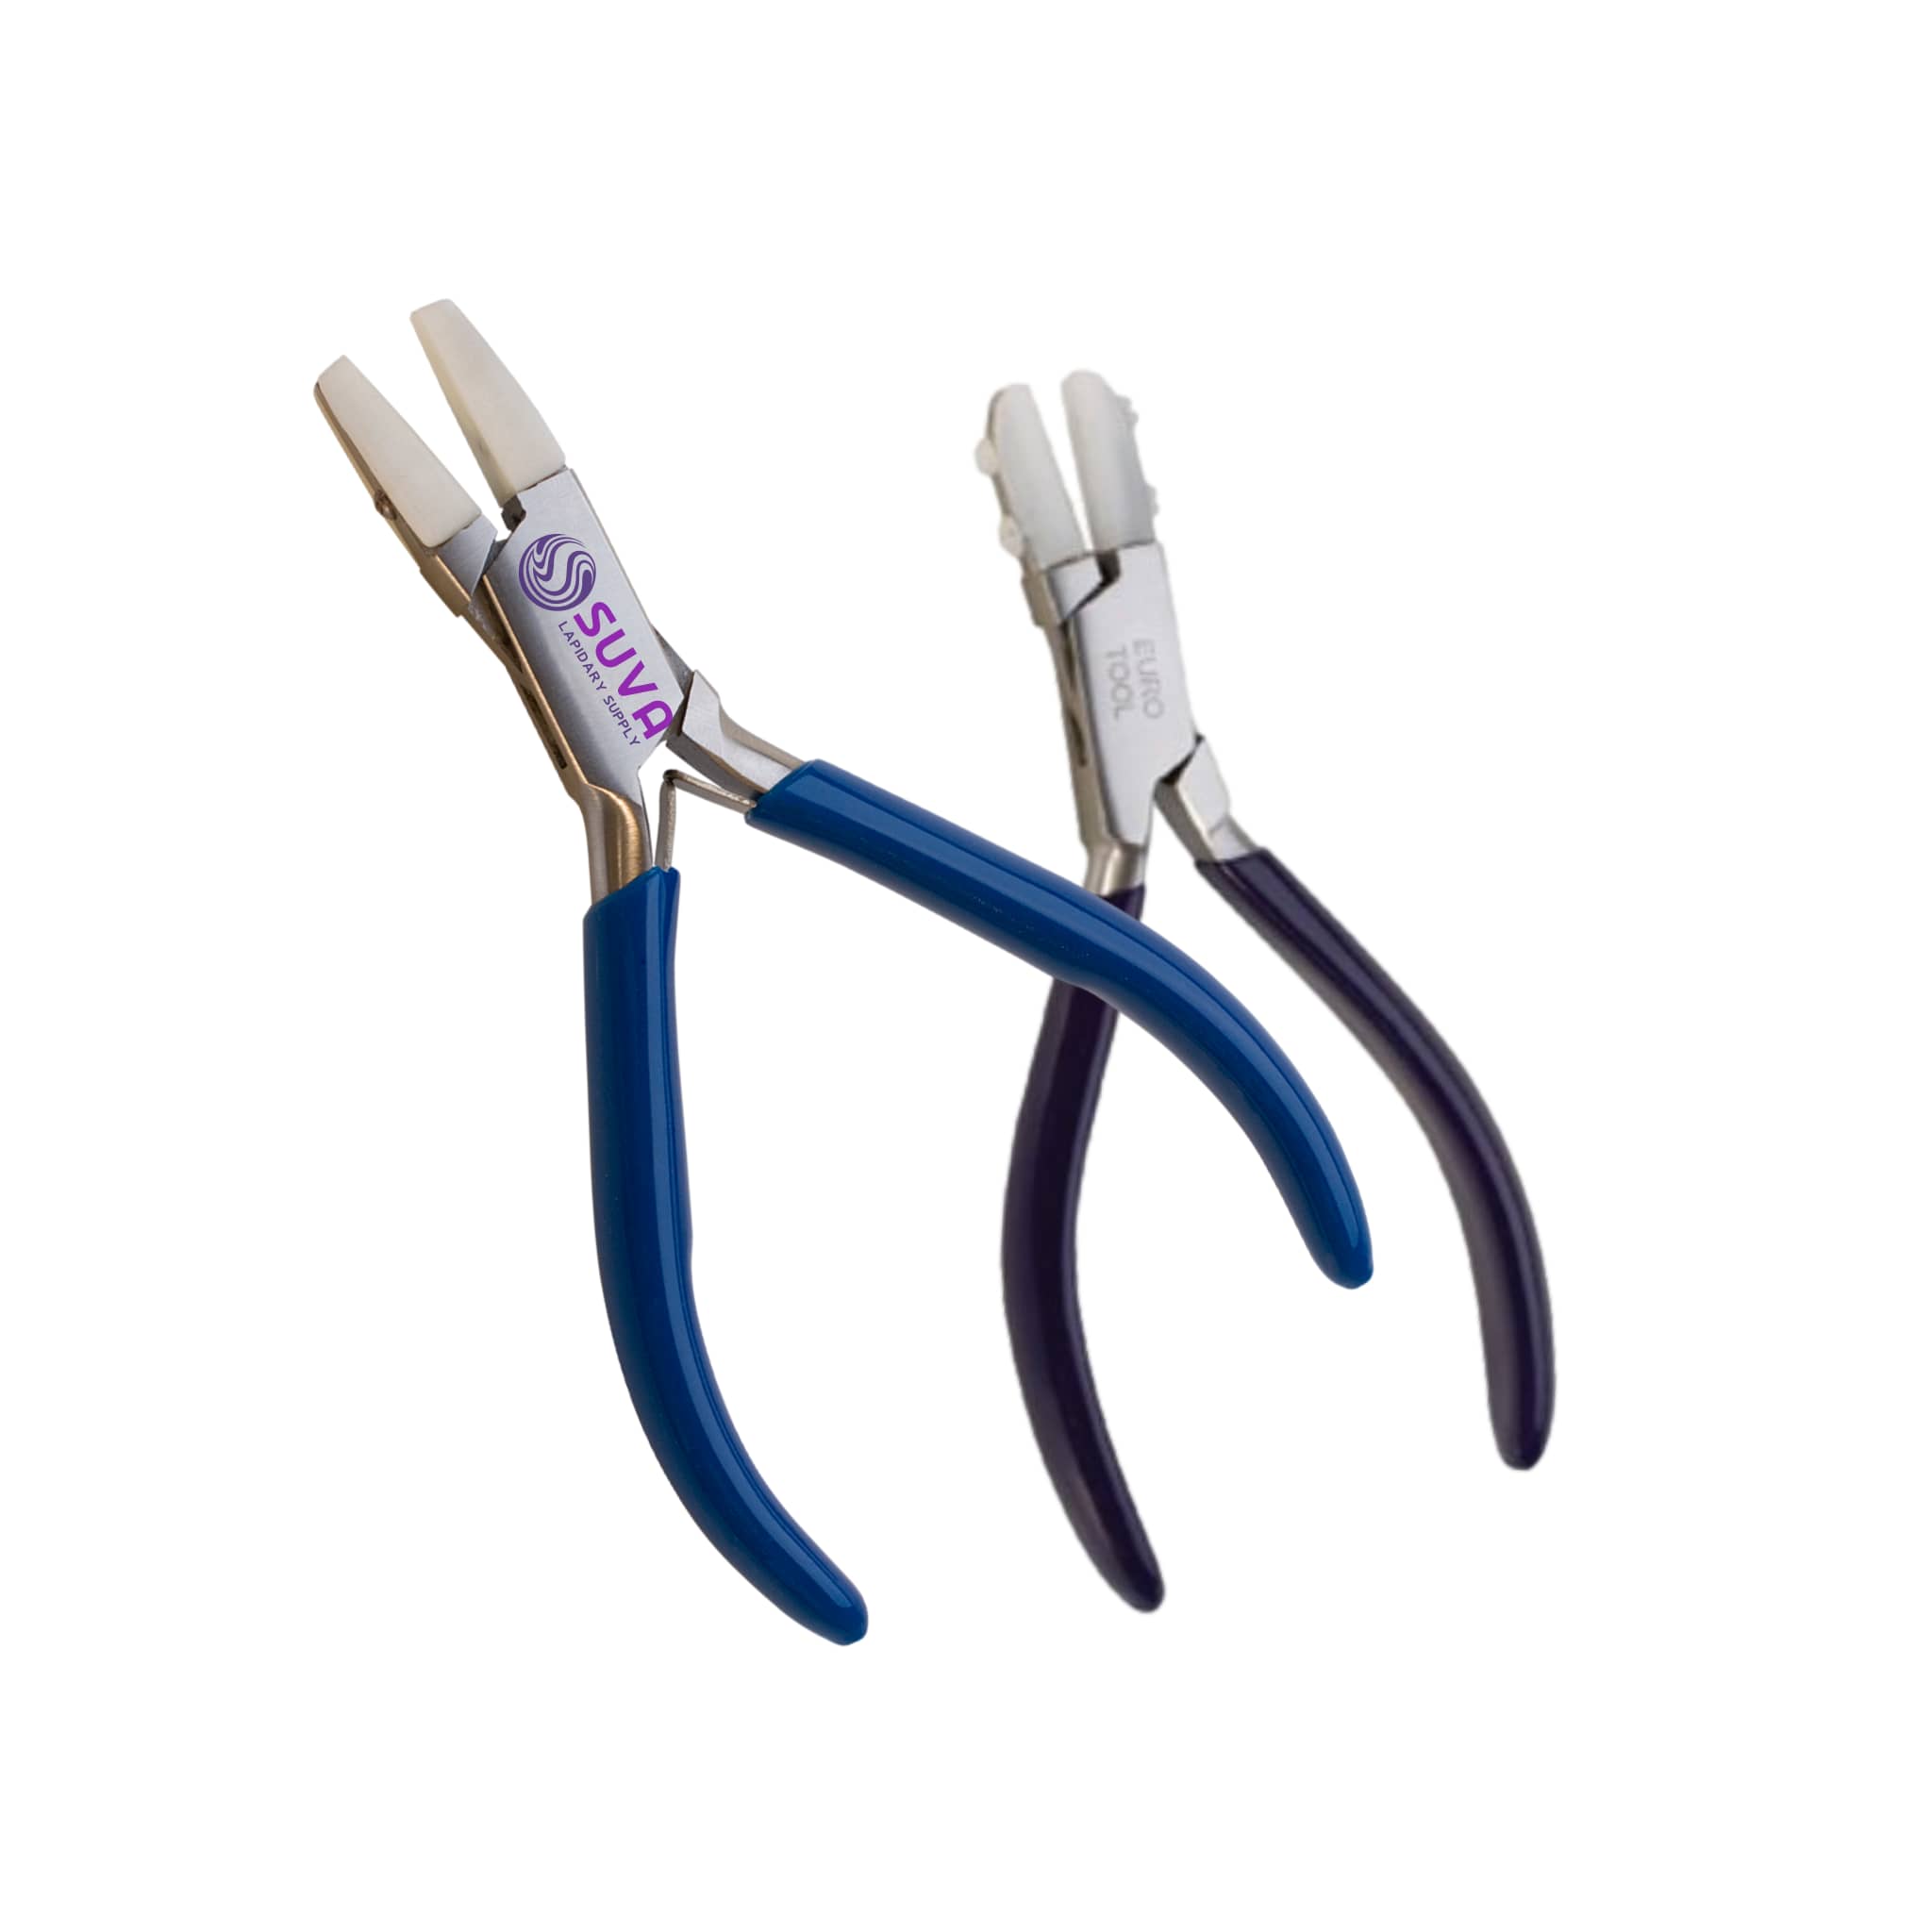 Nylon Jaw Pliers for sale at SUVA Lapidary Supply